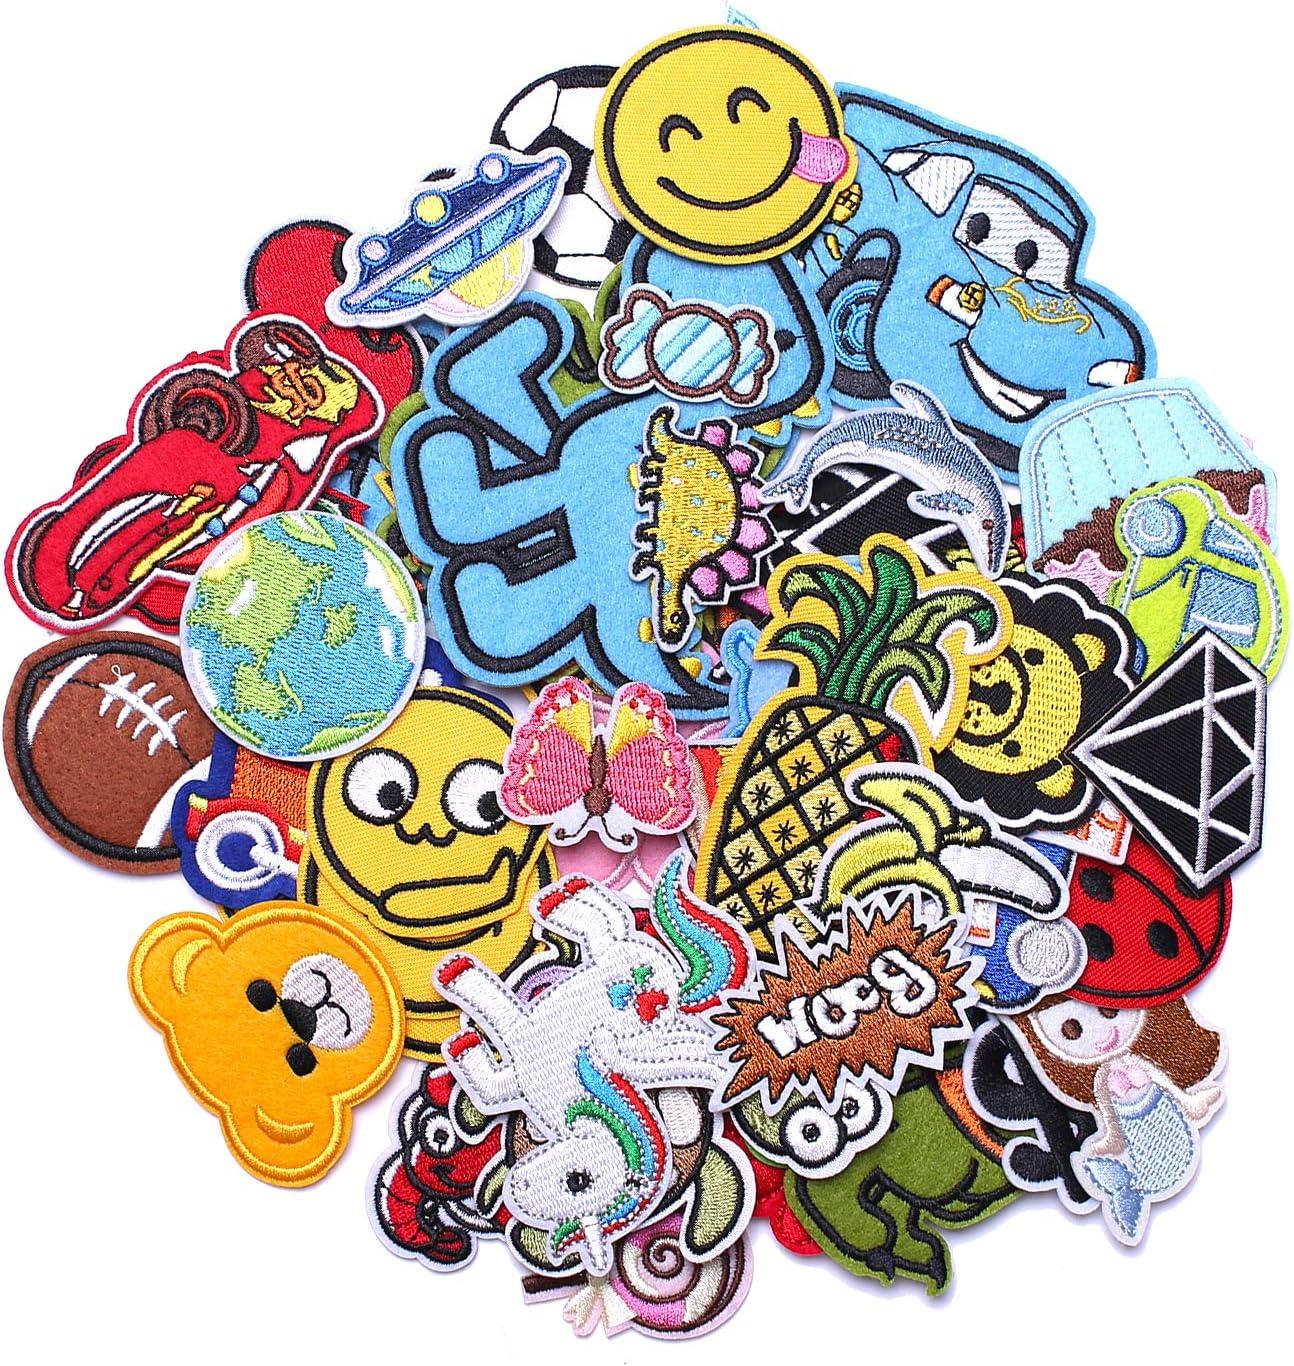 60Pcs Random Assorted Iron on Patches, Cute Sewing Applique for